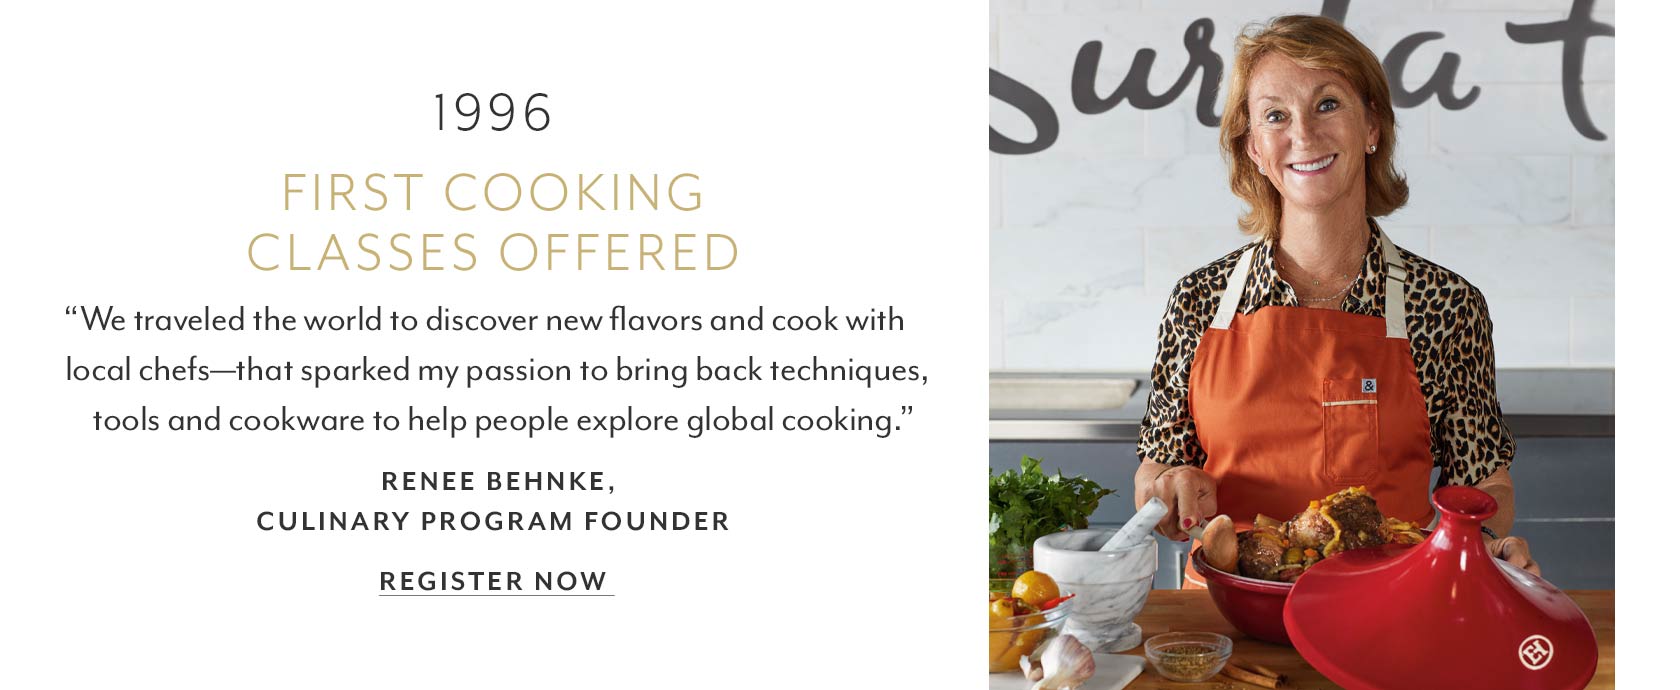 1996 first cooking classes offered. We traveled the world to discover new flavors and cook with local chefs, that sparked my passion to bring back techniques, tools and cookware to help people explore global cooking. Renee Behnke, culinary program founder.